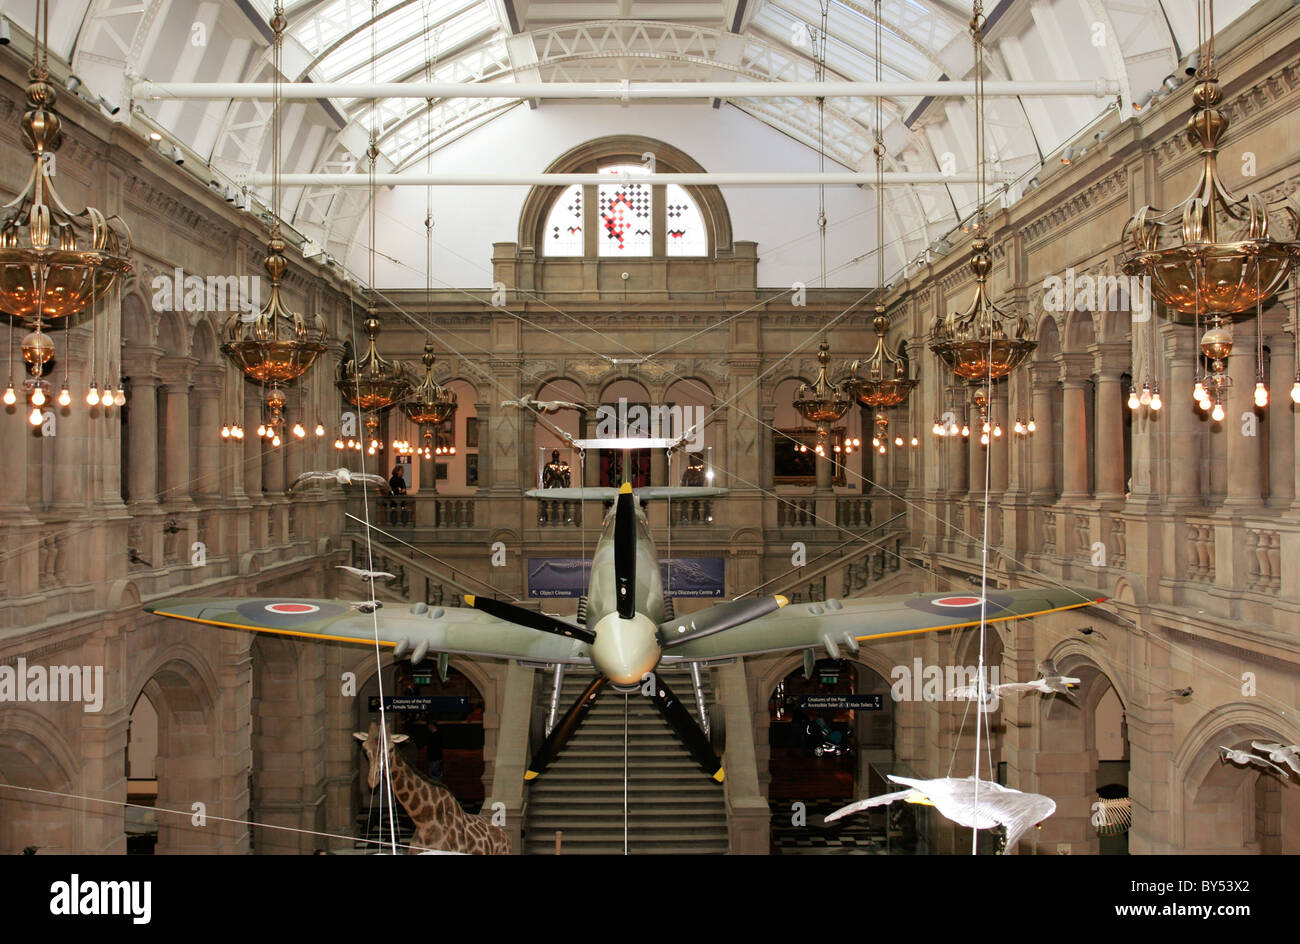 Spitfire inside Kevingrove Art Gallery and Museum in Glasgow, Scotland. Stock Photo